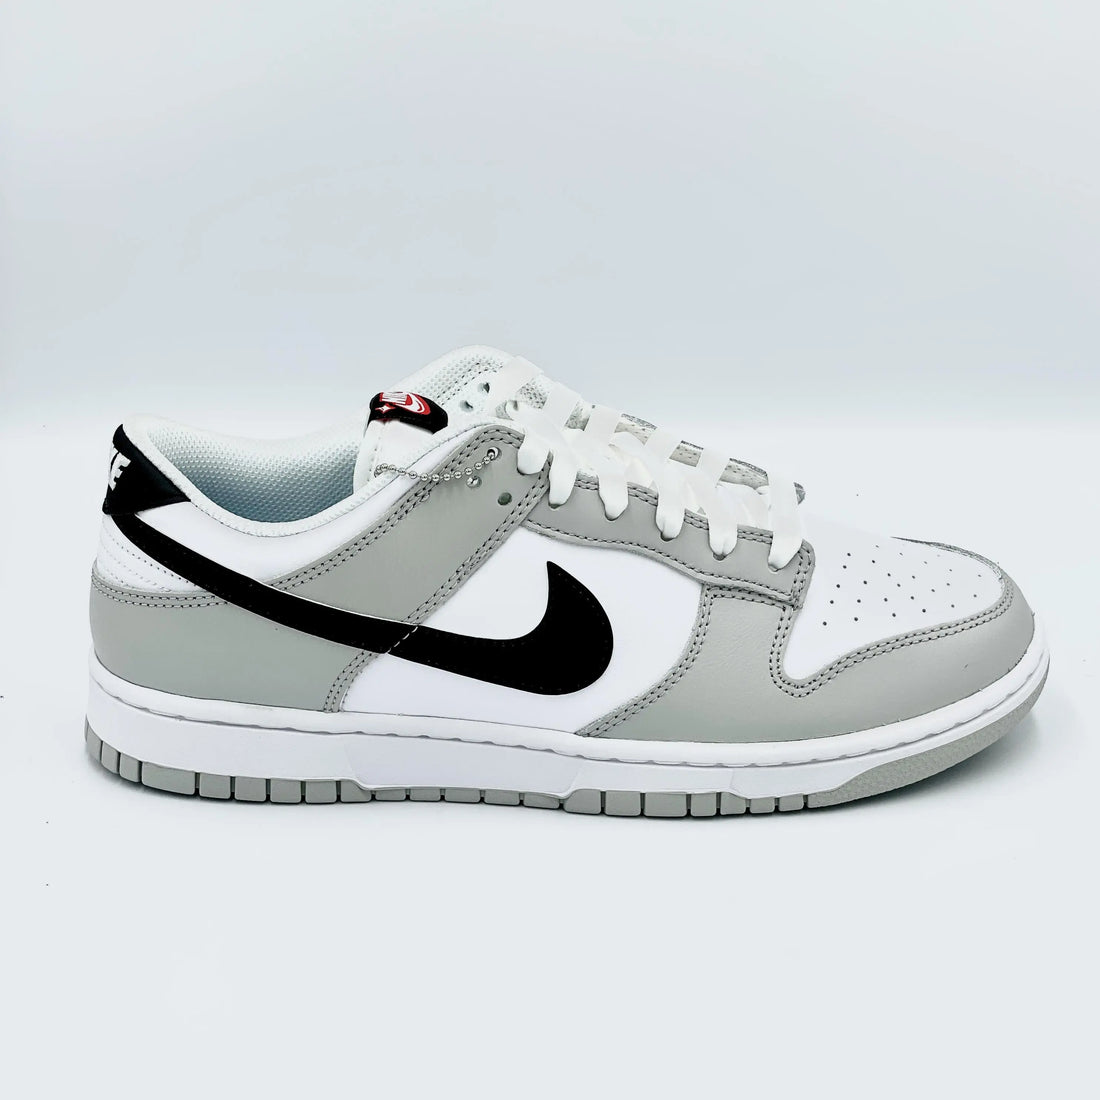 Nike Dunk Low Lottery Pack Grey Fog  SA Sneakers